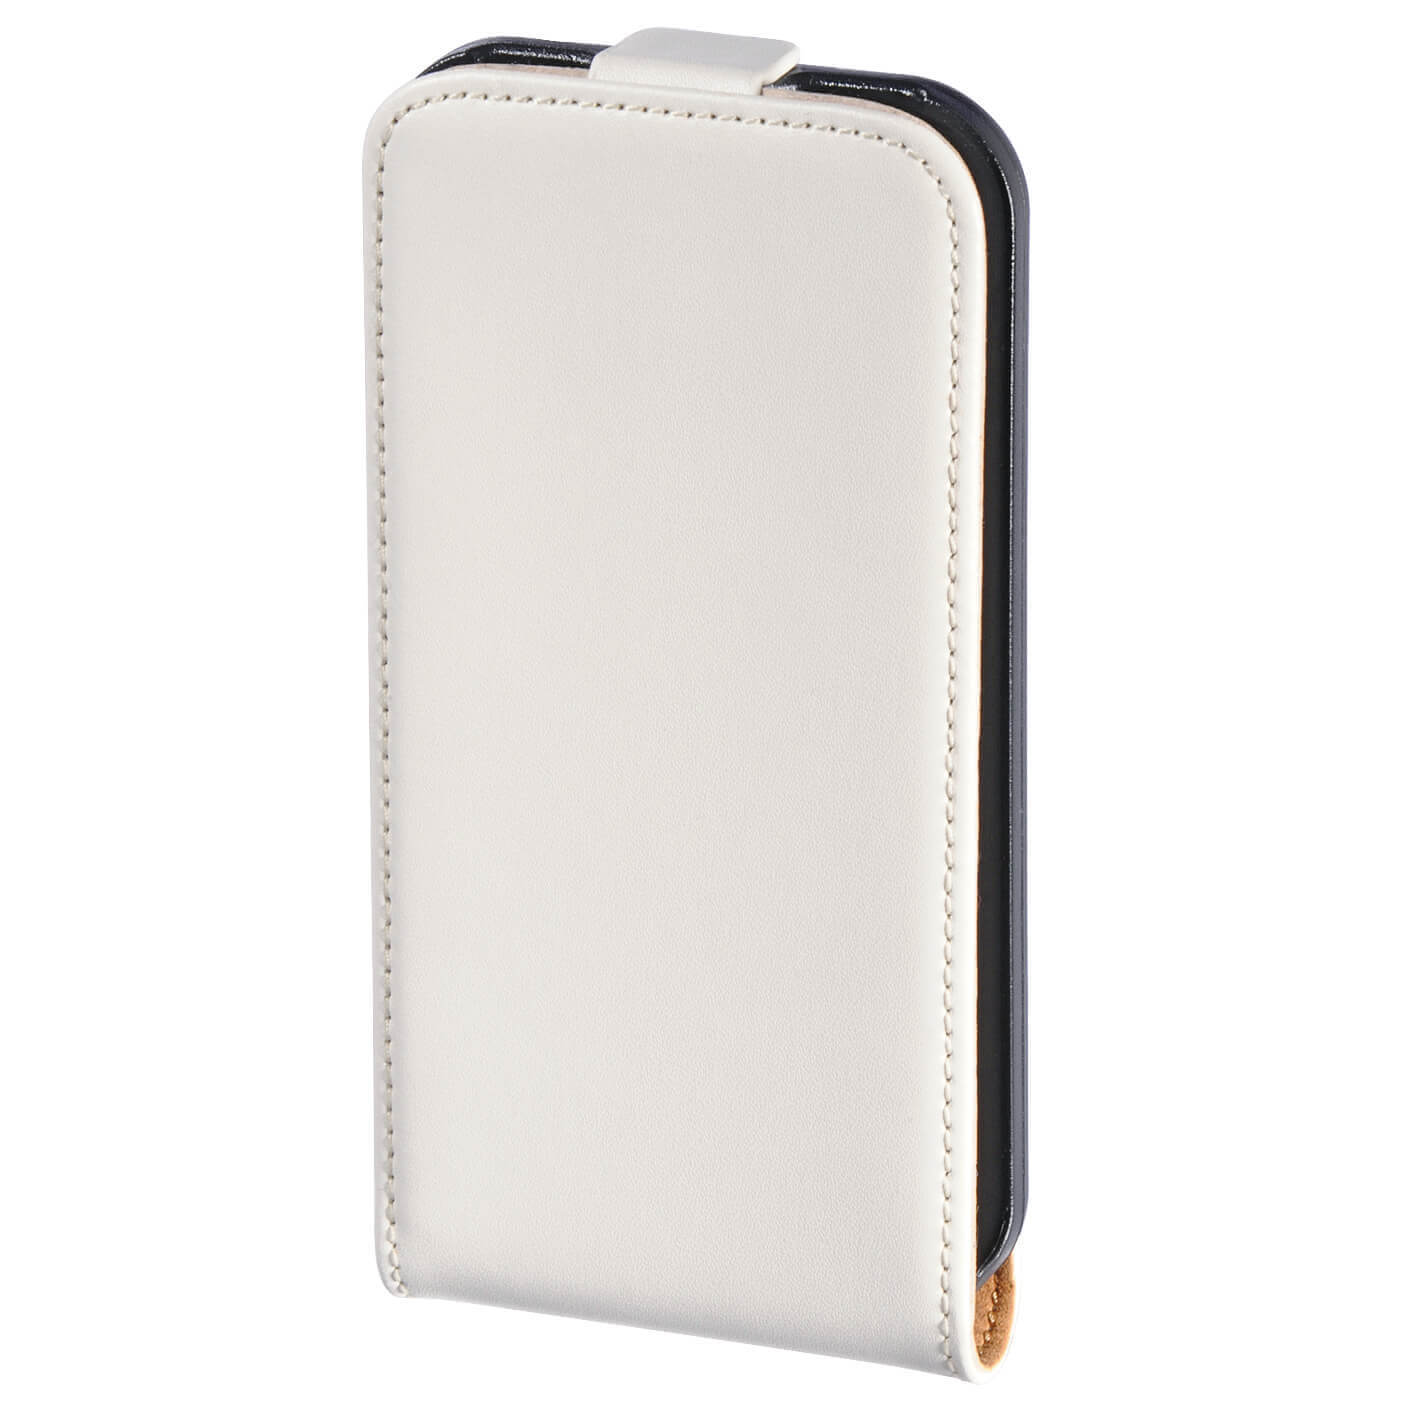 Frame Flap Case for Apple iPh one 4/4S, white